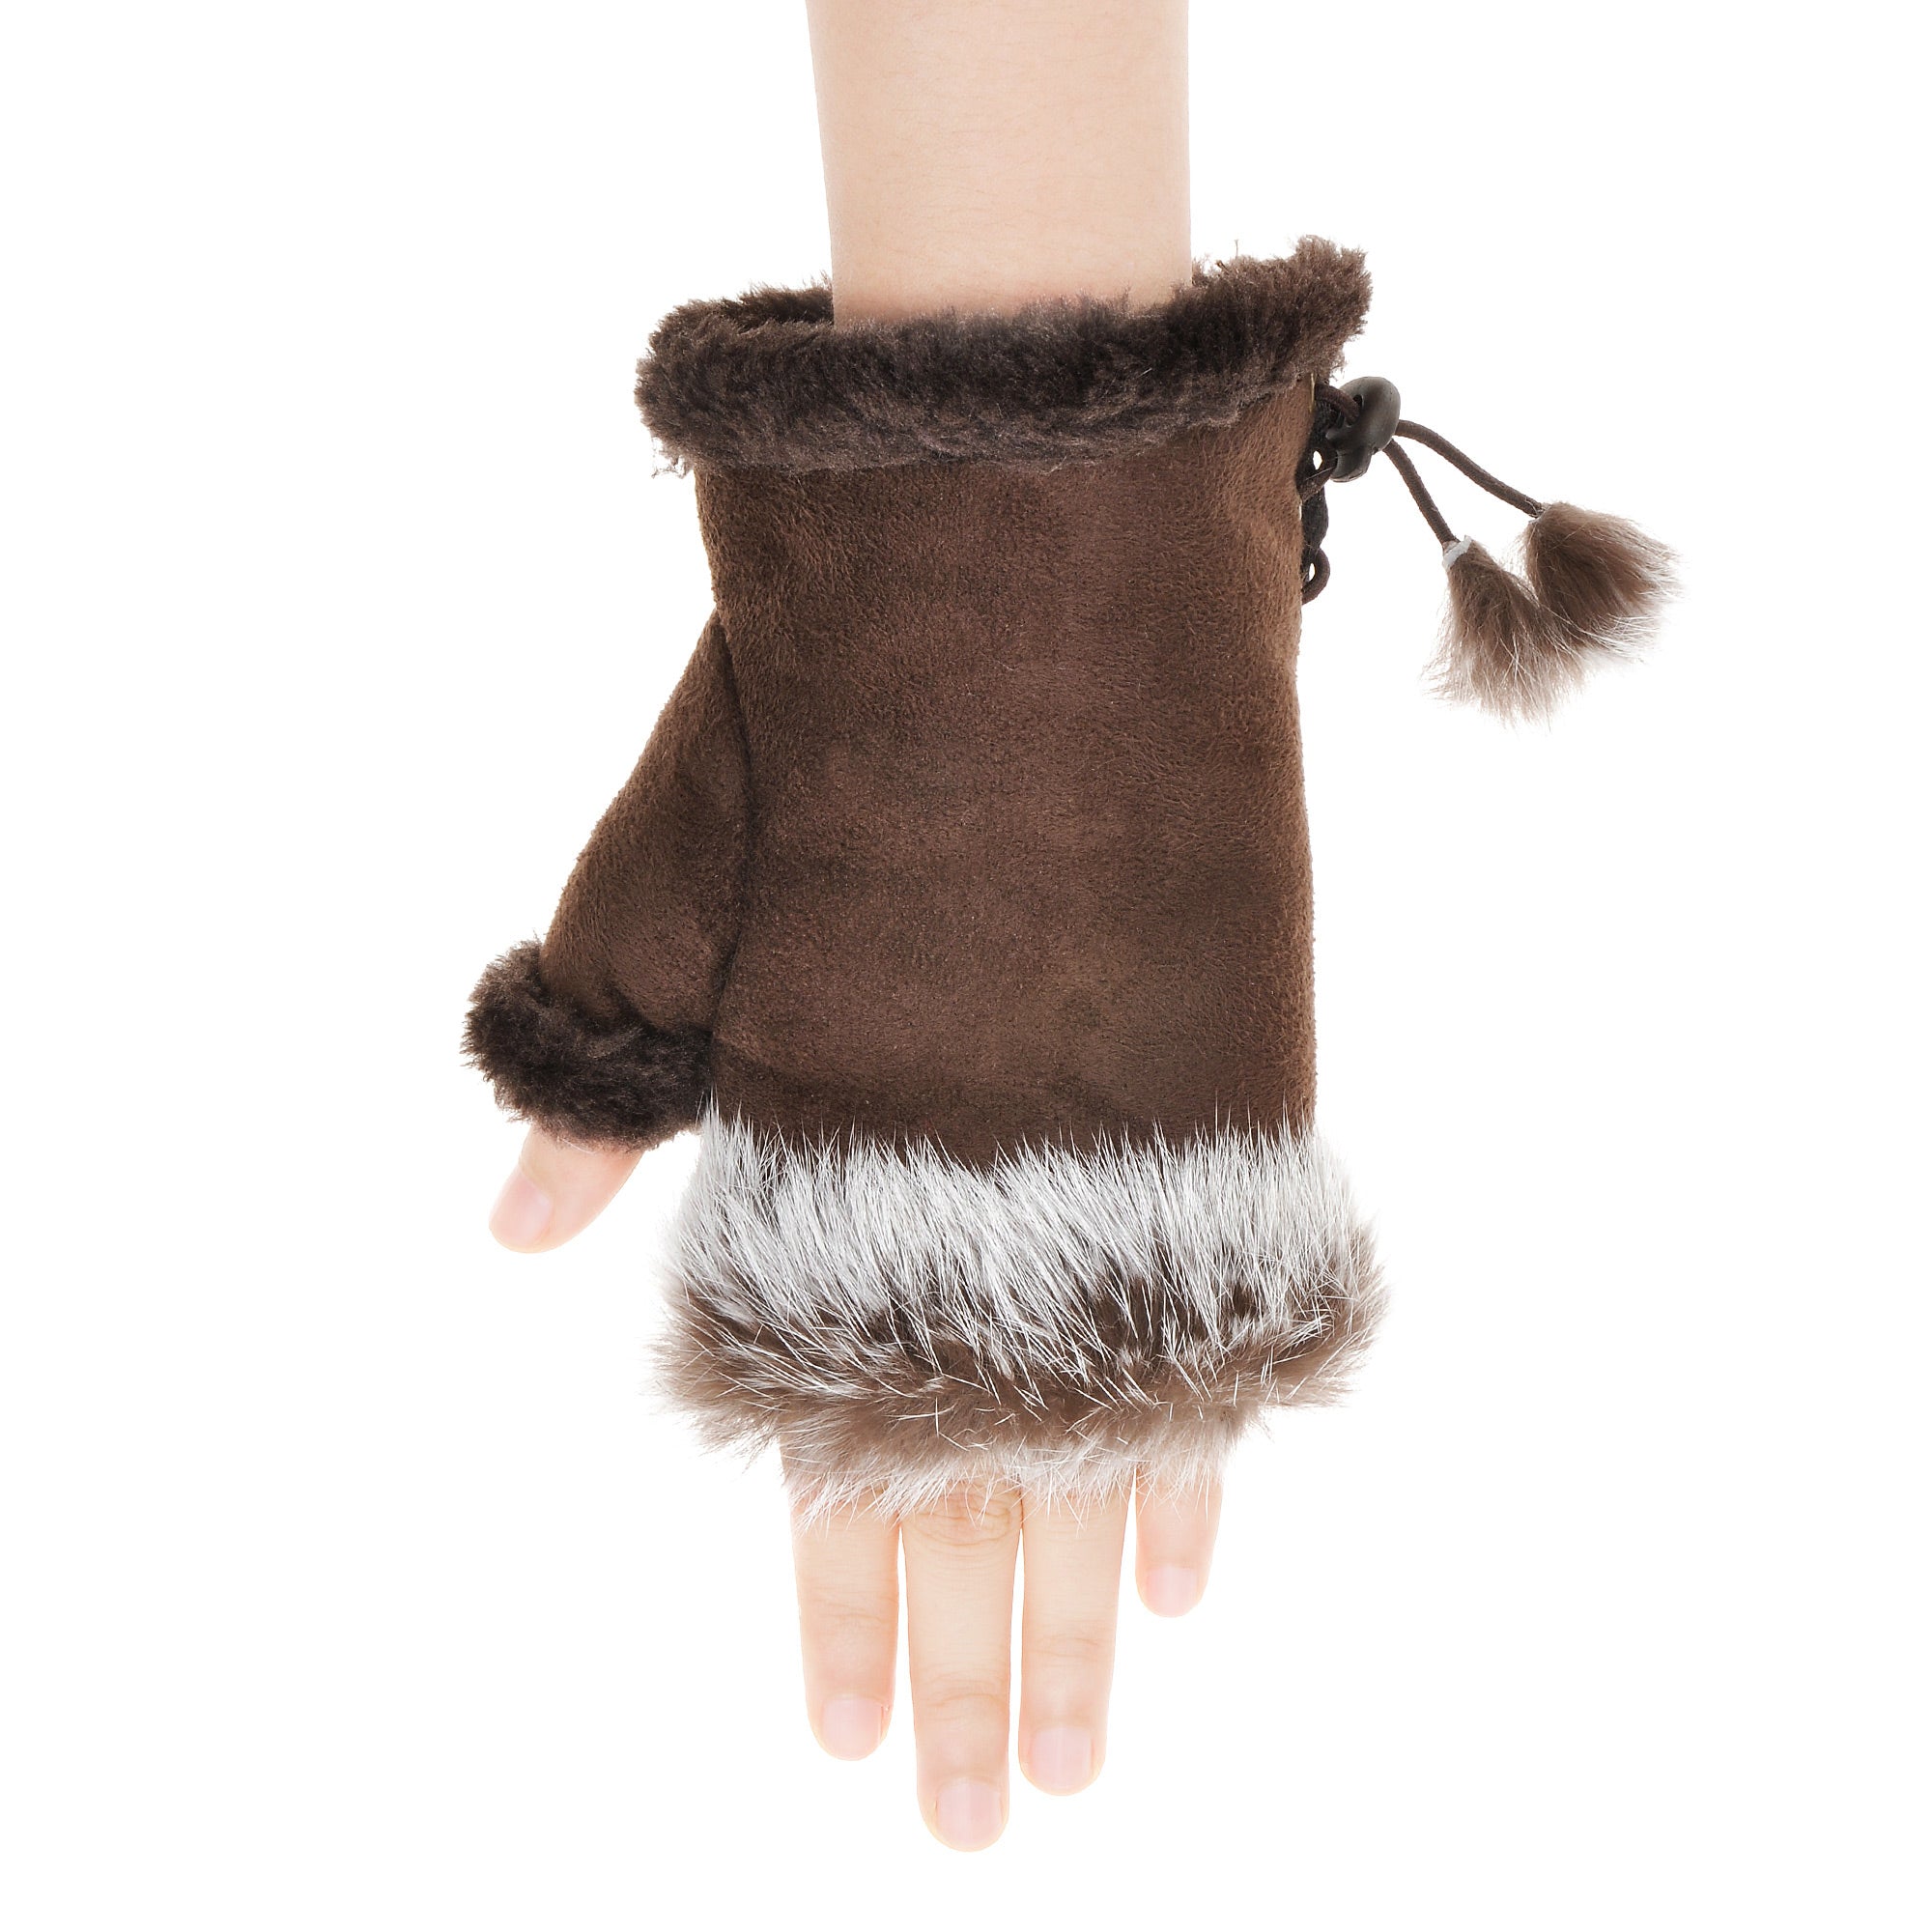 ZLYC Women's Teen's Classic Warm Hands Wrist Fingerless Gloves with Adjustable Drawstring